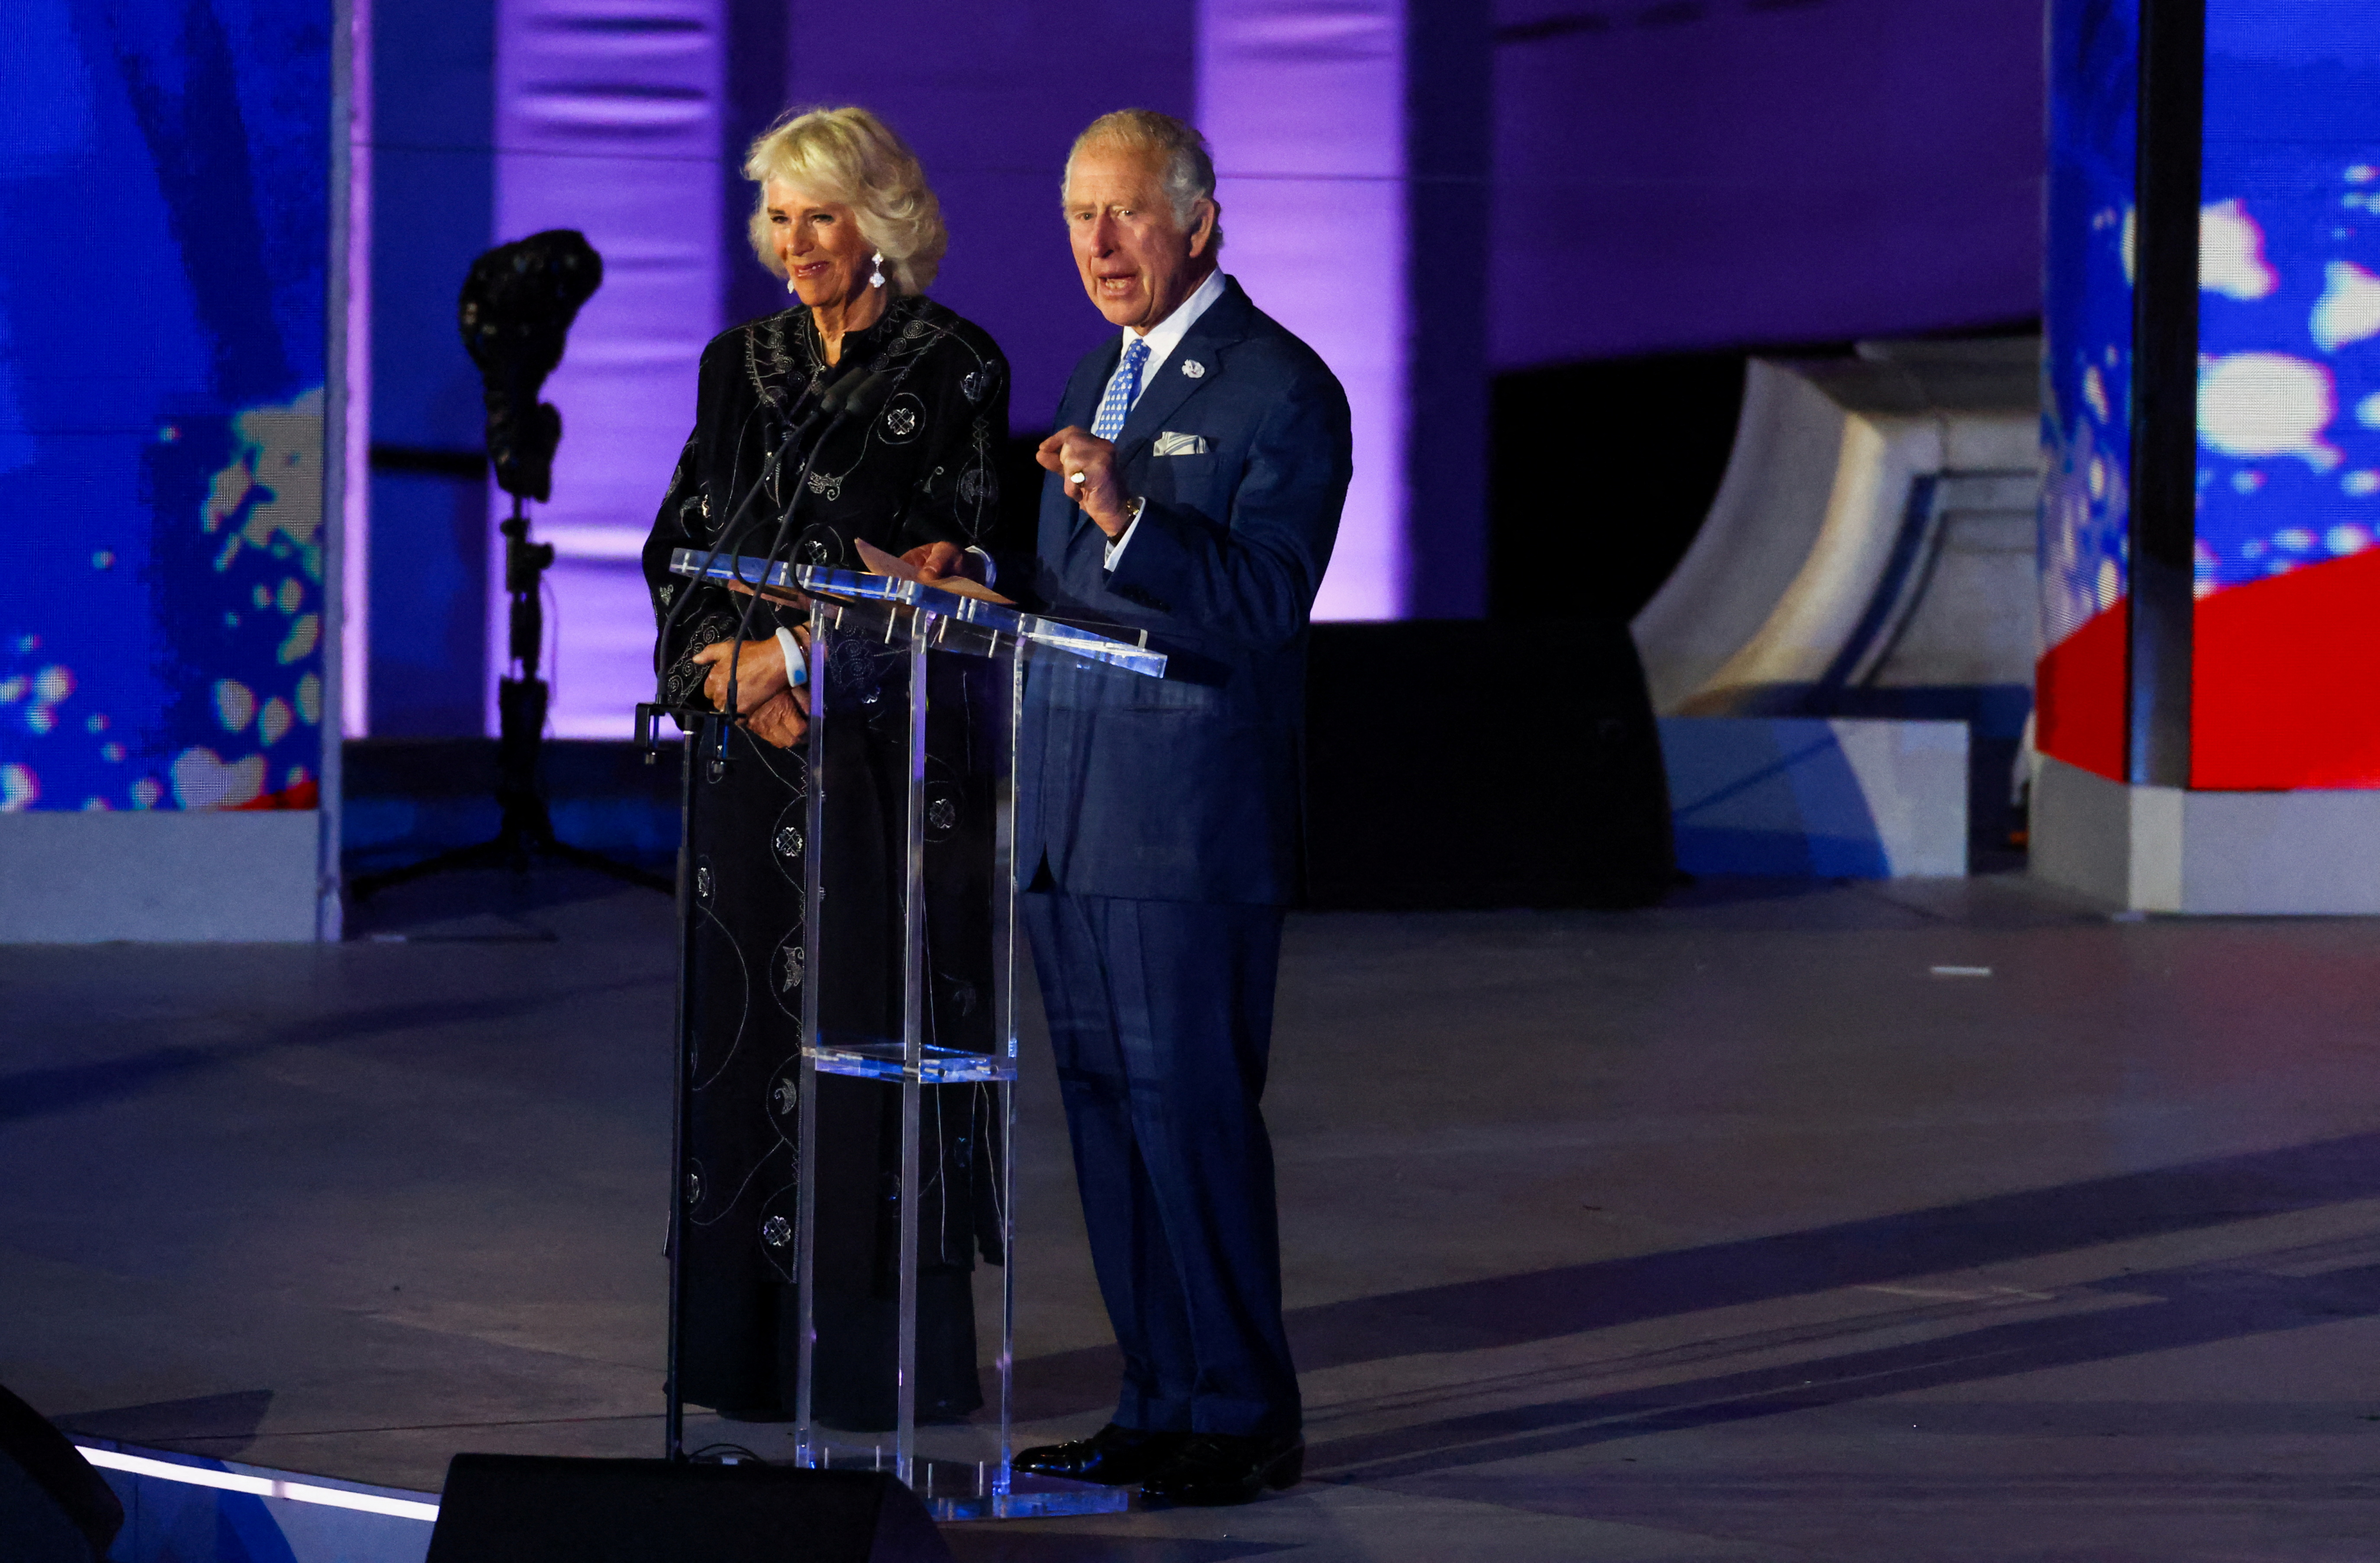 Prince Charles, accompanied by Camilla, Duchess of Cornwall, speaks from the BBC's Platinum Theater as part of the Queen's Platinum Jubilee celebrations on June 4, 2022 (Reuters/Hannah McKay)